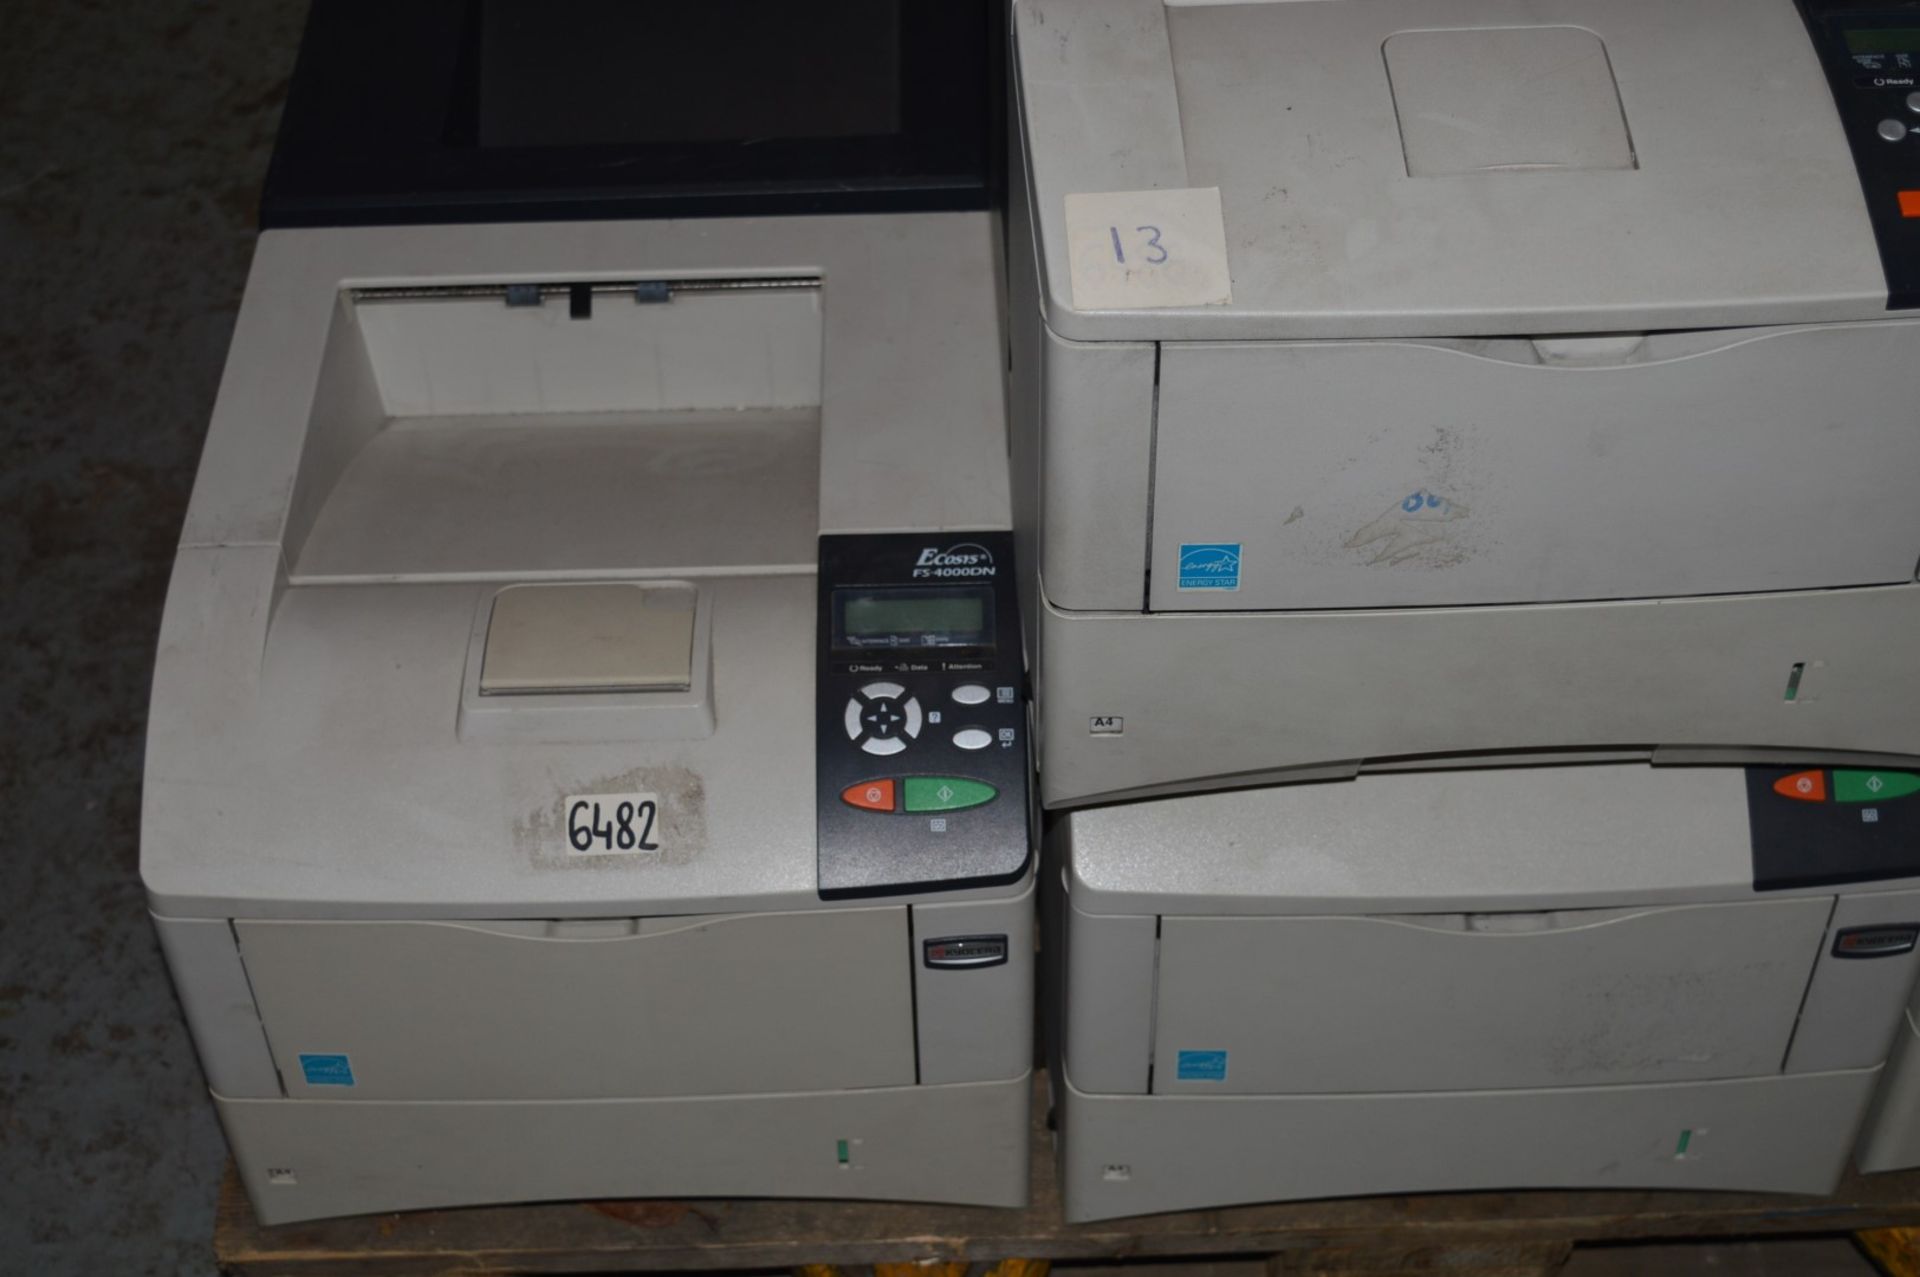 8 x Ecosys Office Laser Printers - Models Include FS4020DN, FS4000DN and FS4000D - CL011 - - Image 9 of 14